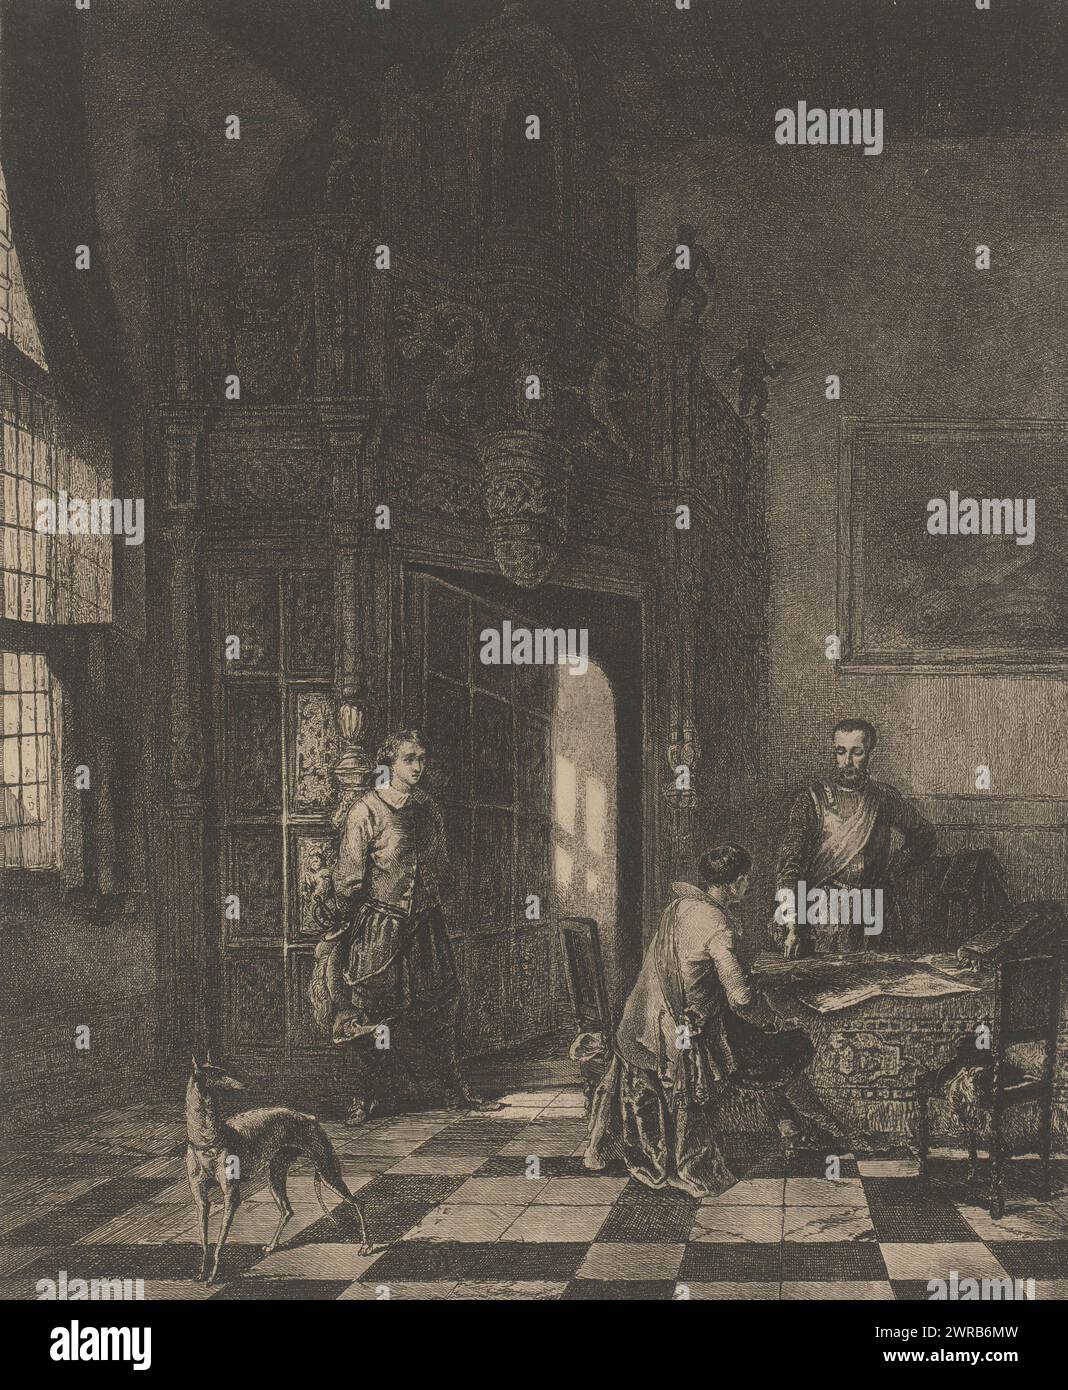 Three men and a dog in the aldermen's hall in the town hall of Oudenaarde, print maker: Guillaume Joseph Vertommen, (attributed to), after painting by: Alexandre Louis Lion, 1825 - 1863, paper, etching, height 377 mm × width 296 mm, print Stock Photo